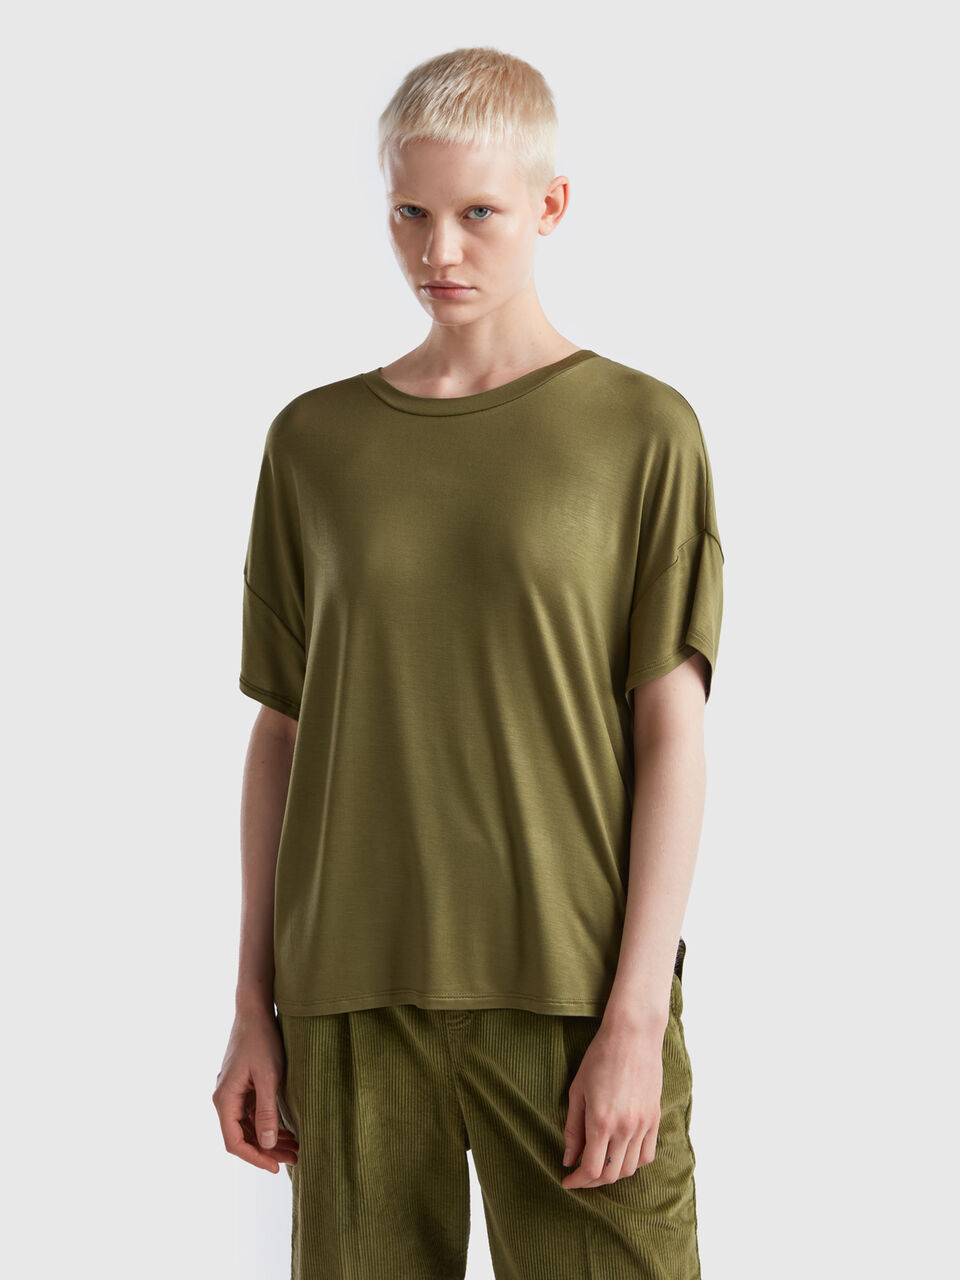 T-shirt in sustainable stretch viscose Benetton | - Green Military